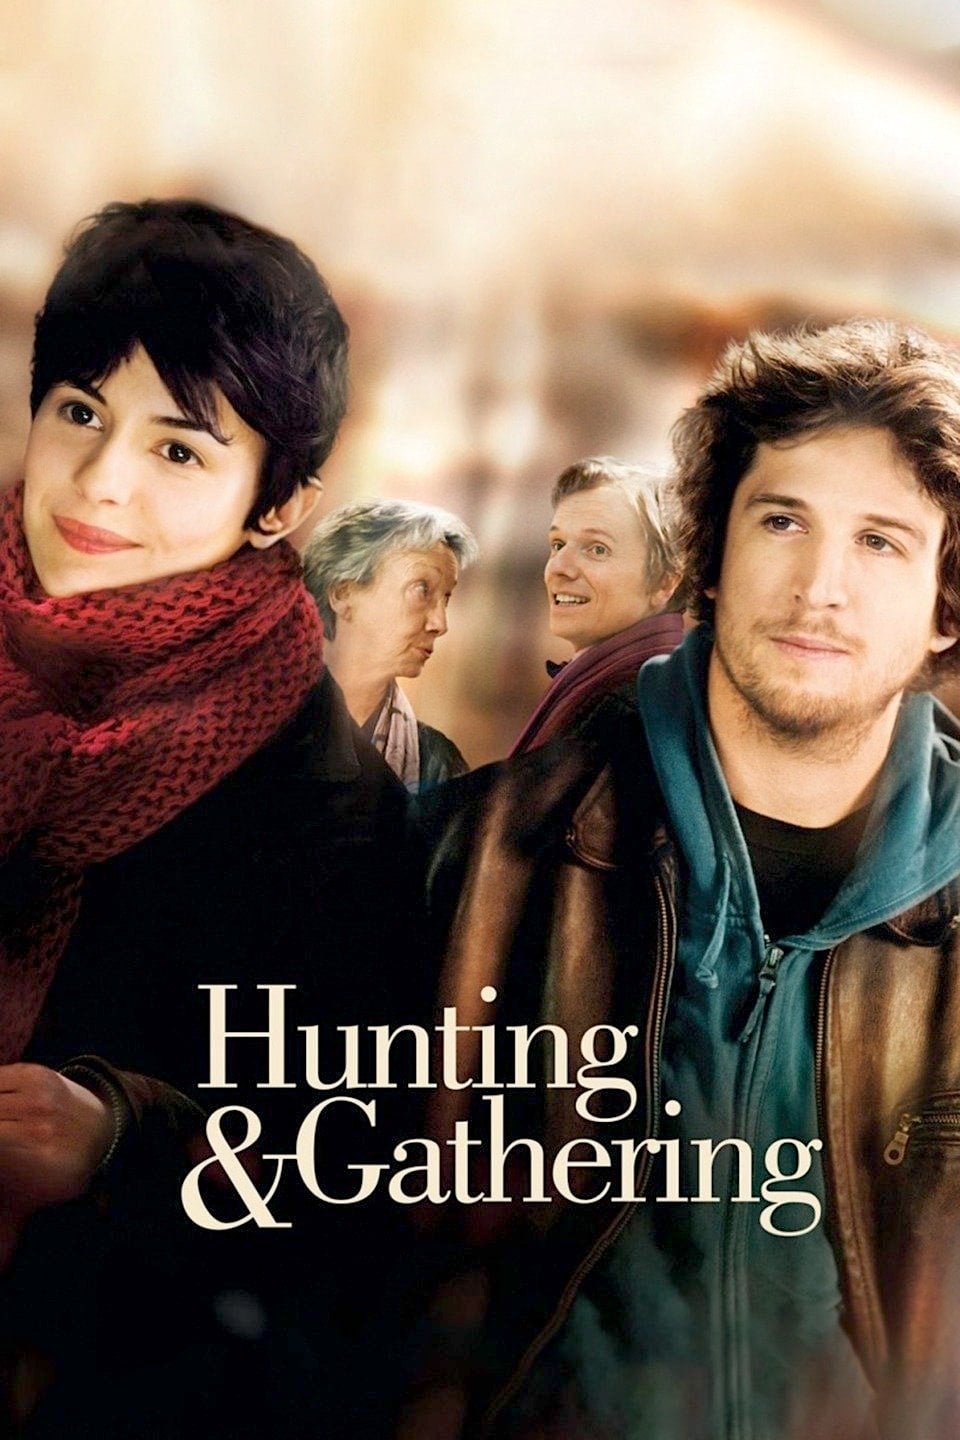 Hunting and Gathering (2007)